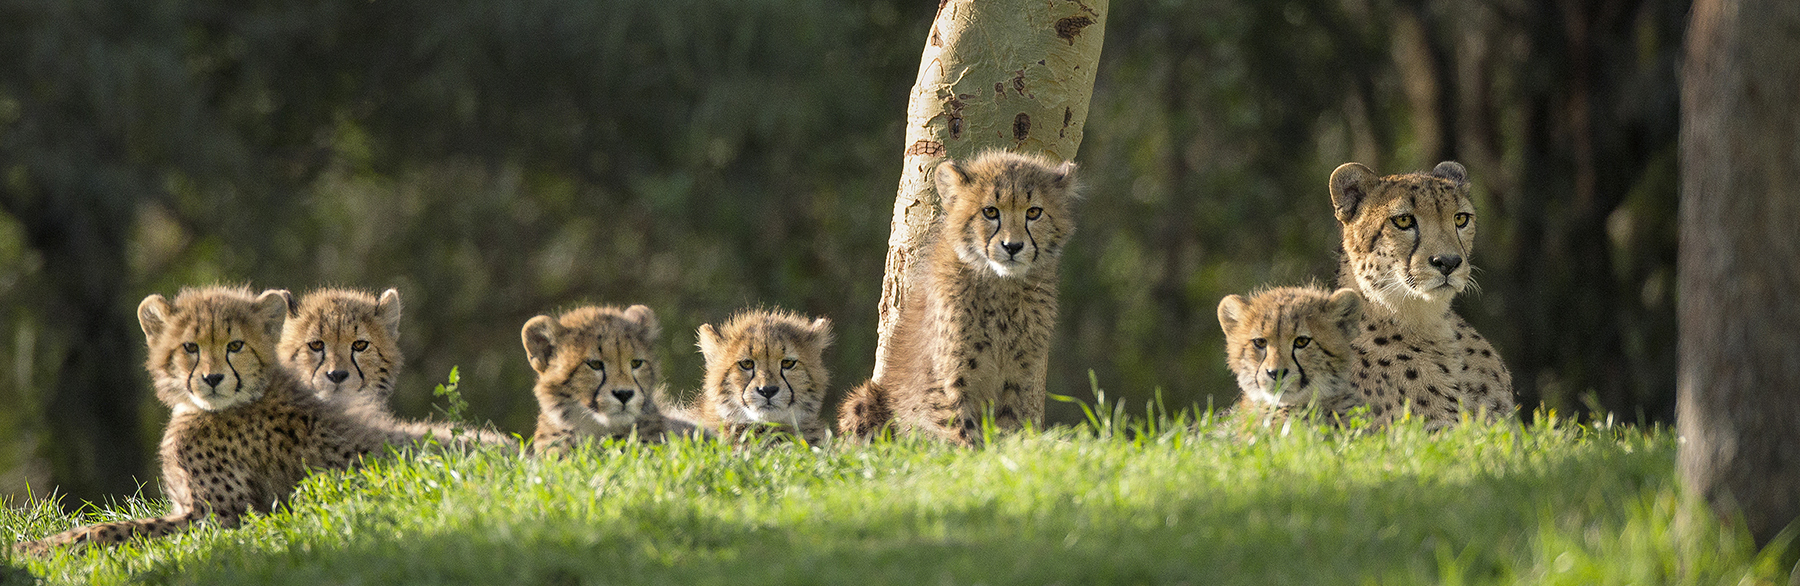 GET AN EYEFUL With six fast, feisty cheetah cubs, mom Addison has a lot to keep track of. The cubs are also doing a lot of watching, as their Okavango Outpost exhibit area provides a commanding view of rhinos, giraffes, and other animals in East Africa.